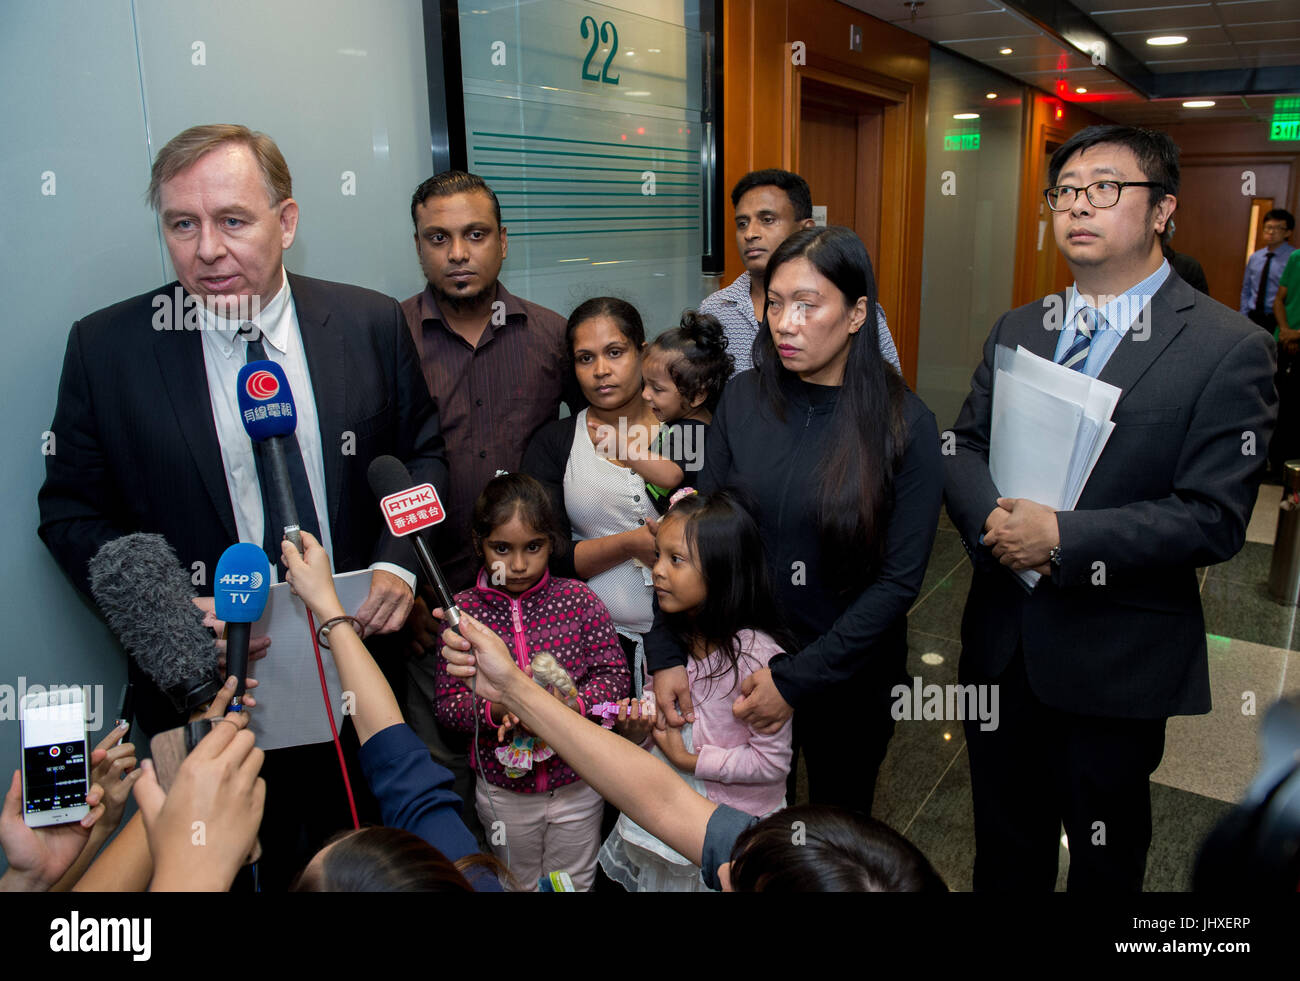 Hong Kong, Hong Kong SAR, China. 17th July, 2017. The Snowden Guardian angels appear at the Torture claims appeal Board.Despite arriving in Hong Kong in different years the families claims have been link due to their harbouring of whistleblower Edward Snowden. Barrister Robert Tibbo speaks to the press (L), Supun Thilina Kellapatha (2nd L with his daughter Sethumdi), Nadeeka Dilrukshi Nonis (3rd Left with her son Dinath), Ajith Puspa(3rd R), Vanessa Mae Rodel (2nd R with her daughter Keana)and lawyer Jonathan Man Credit: Jayne Russell/ZUMA Wire/Alamy Live News Stock Photo